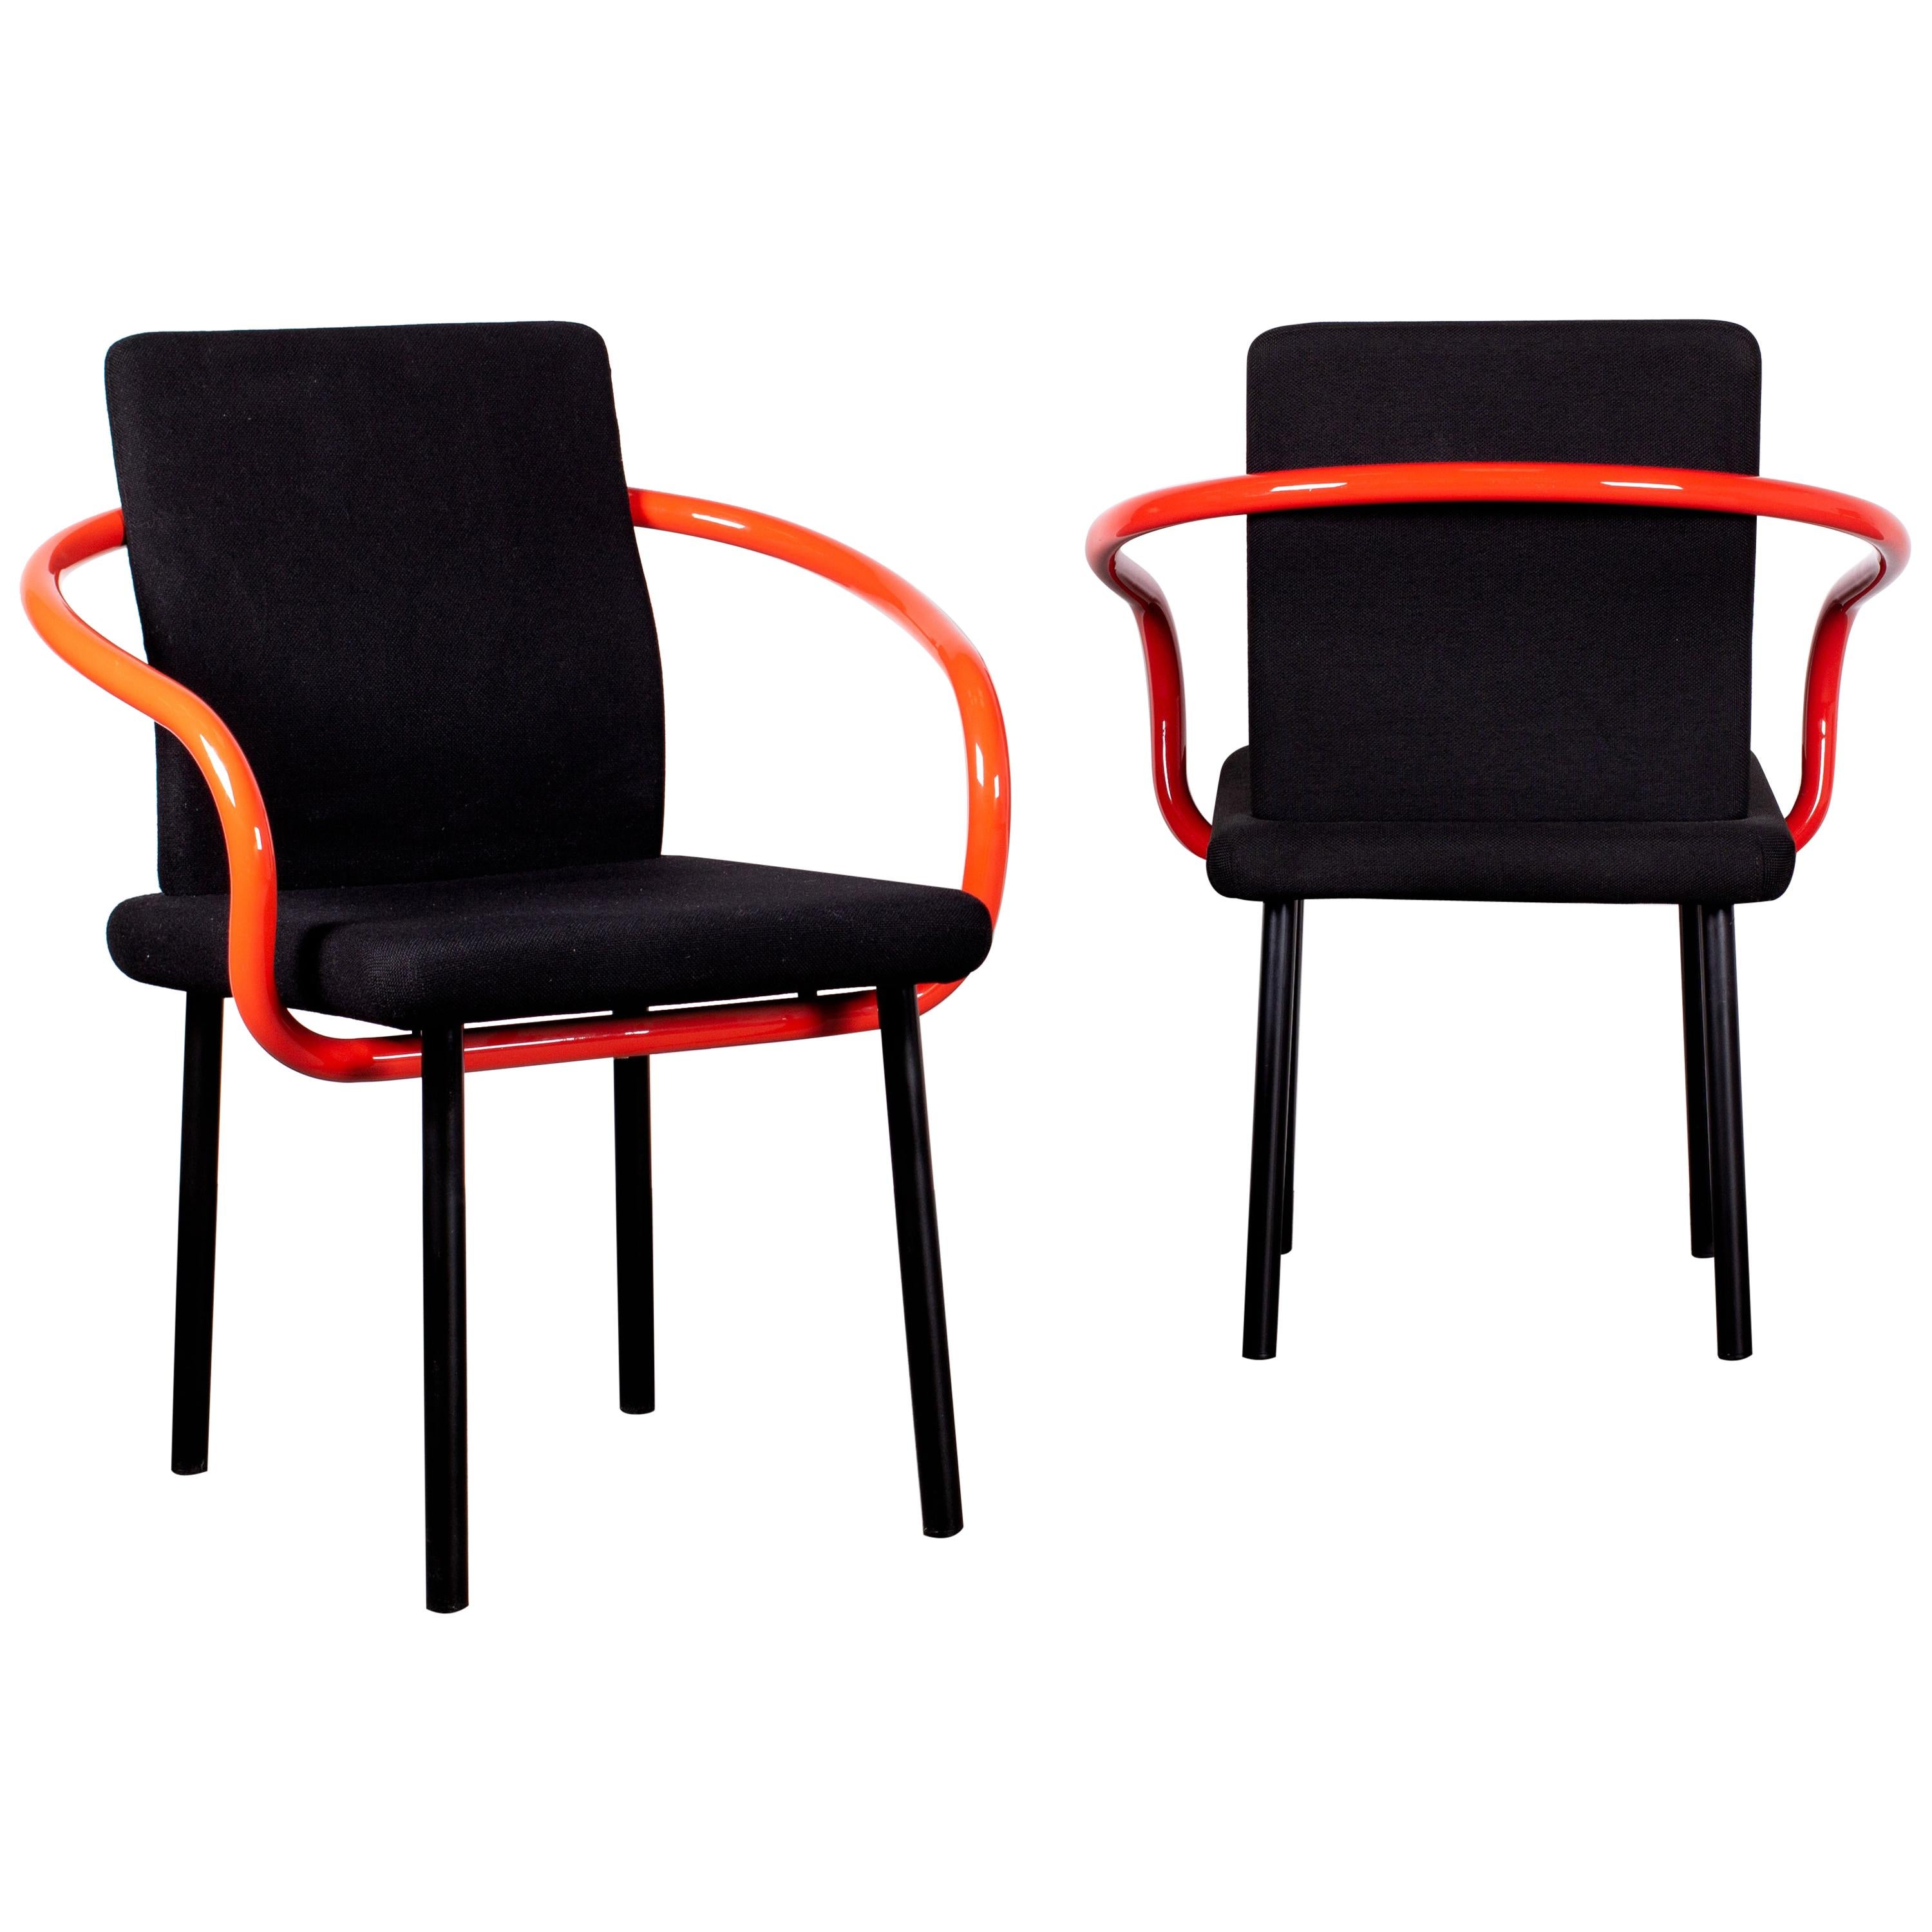 Pair of Ettore Sottsass Mandarin Chairs for Knoll in Red & Black